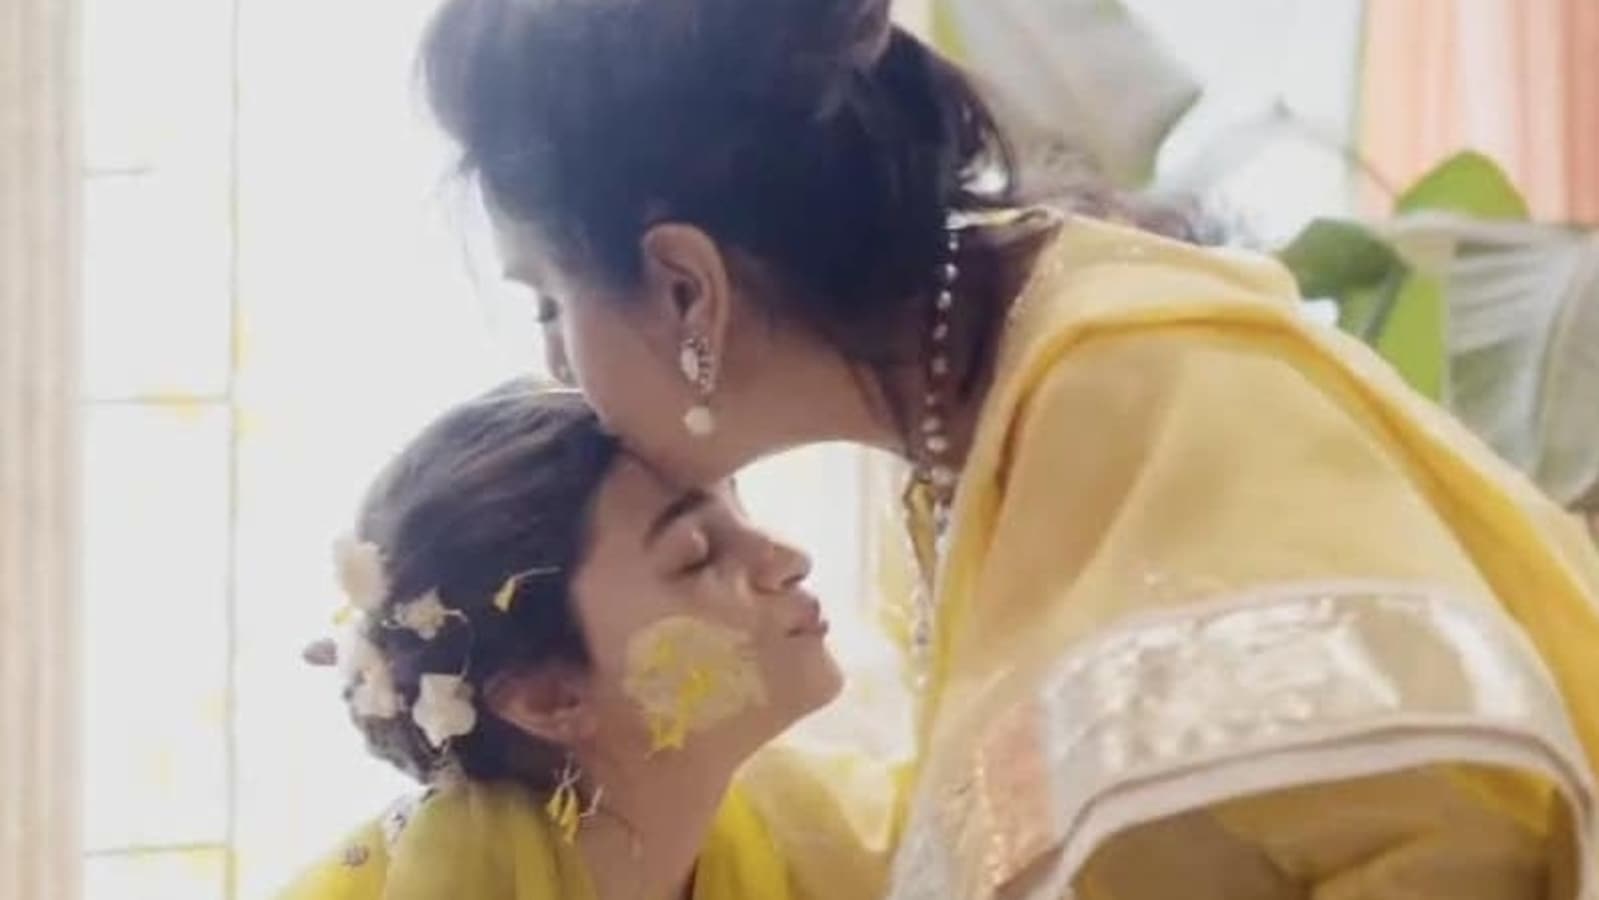 Alia Bhatt shares unseen photo with Neetu Kapoor, wishes her ‘friend’ and ‘soon to be dadi ma’ on her birthday. See pic